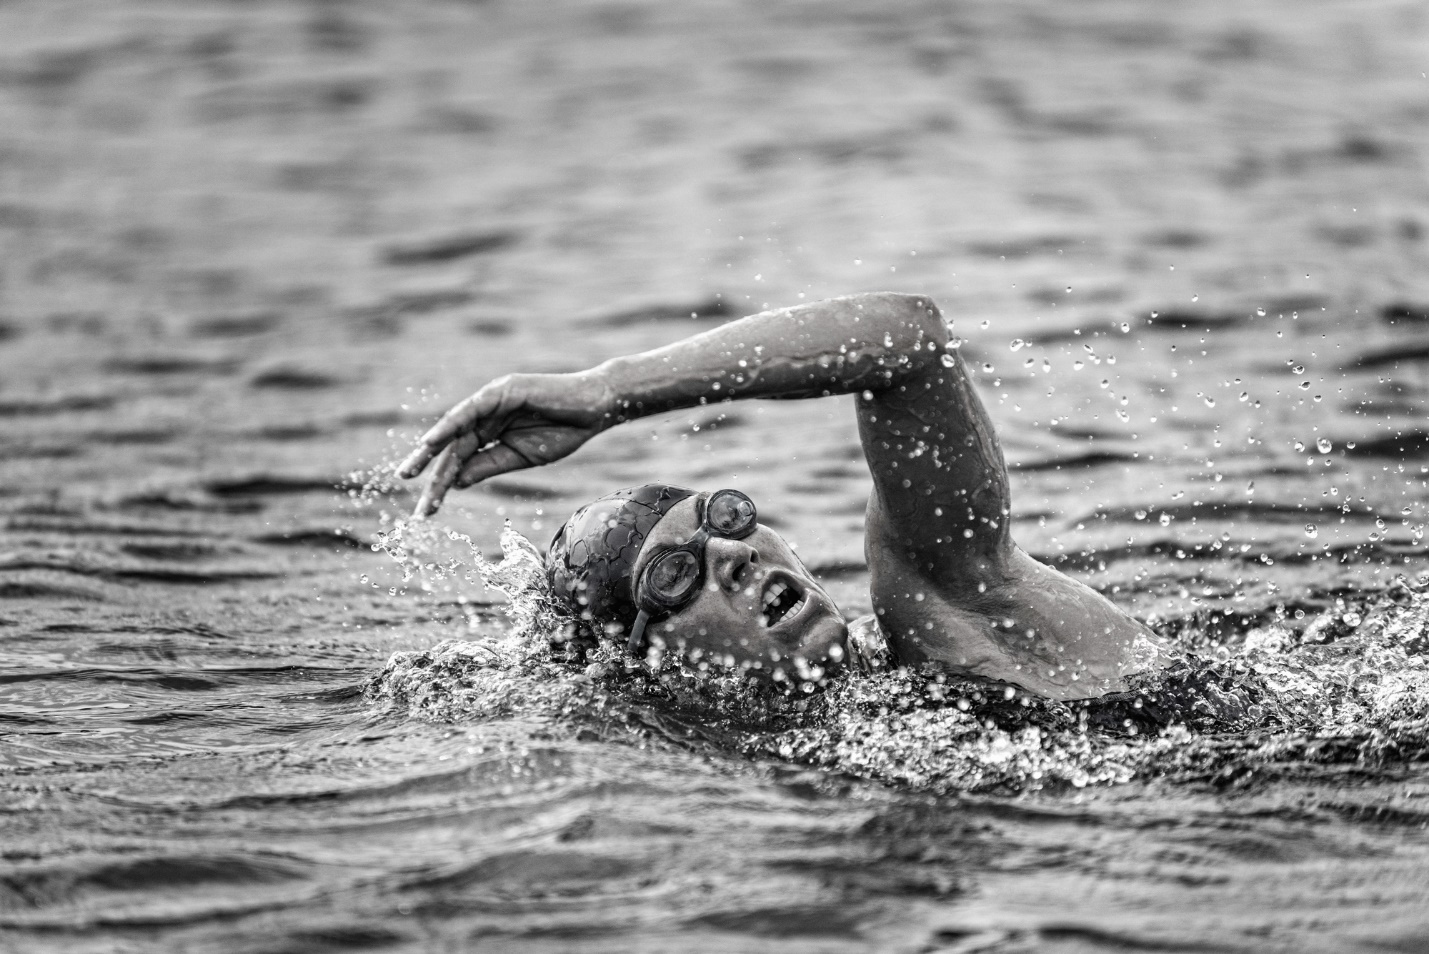 A person swimming in water

Description automatically generated with medium confidence